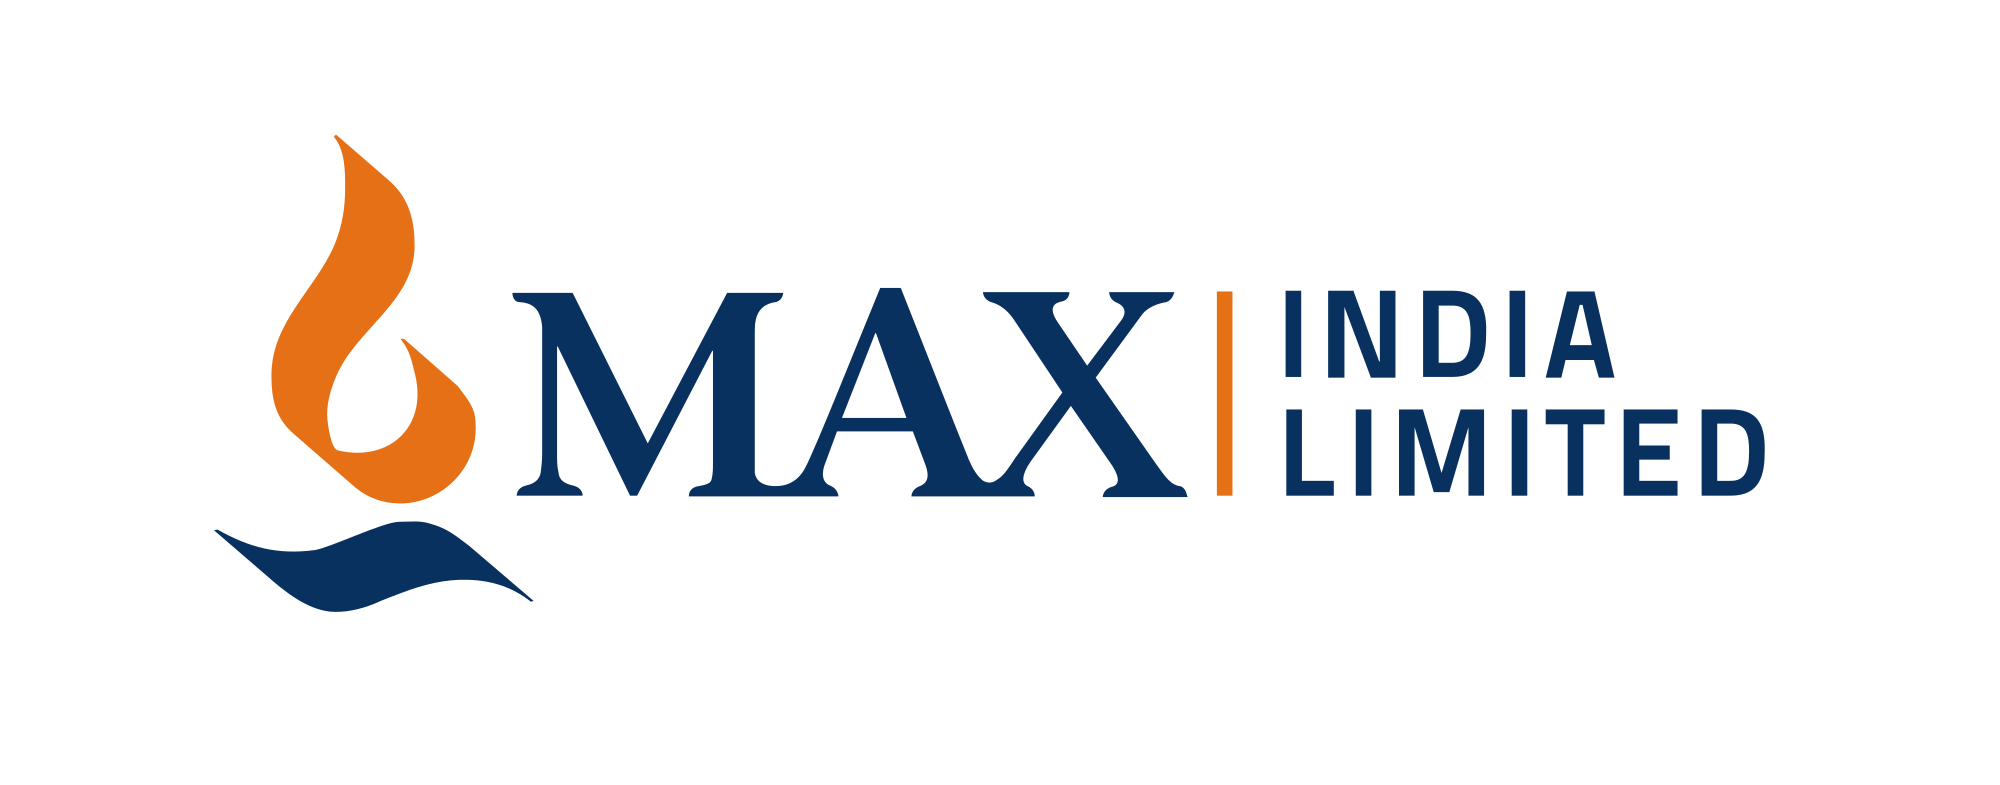 Composite Merger Scheme Involving Radiant Life Care, Max Healthcare and Max India Gets 99% Minority Shareholders Approval